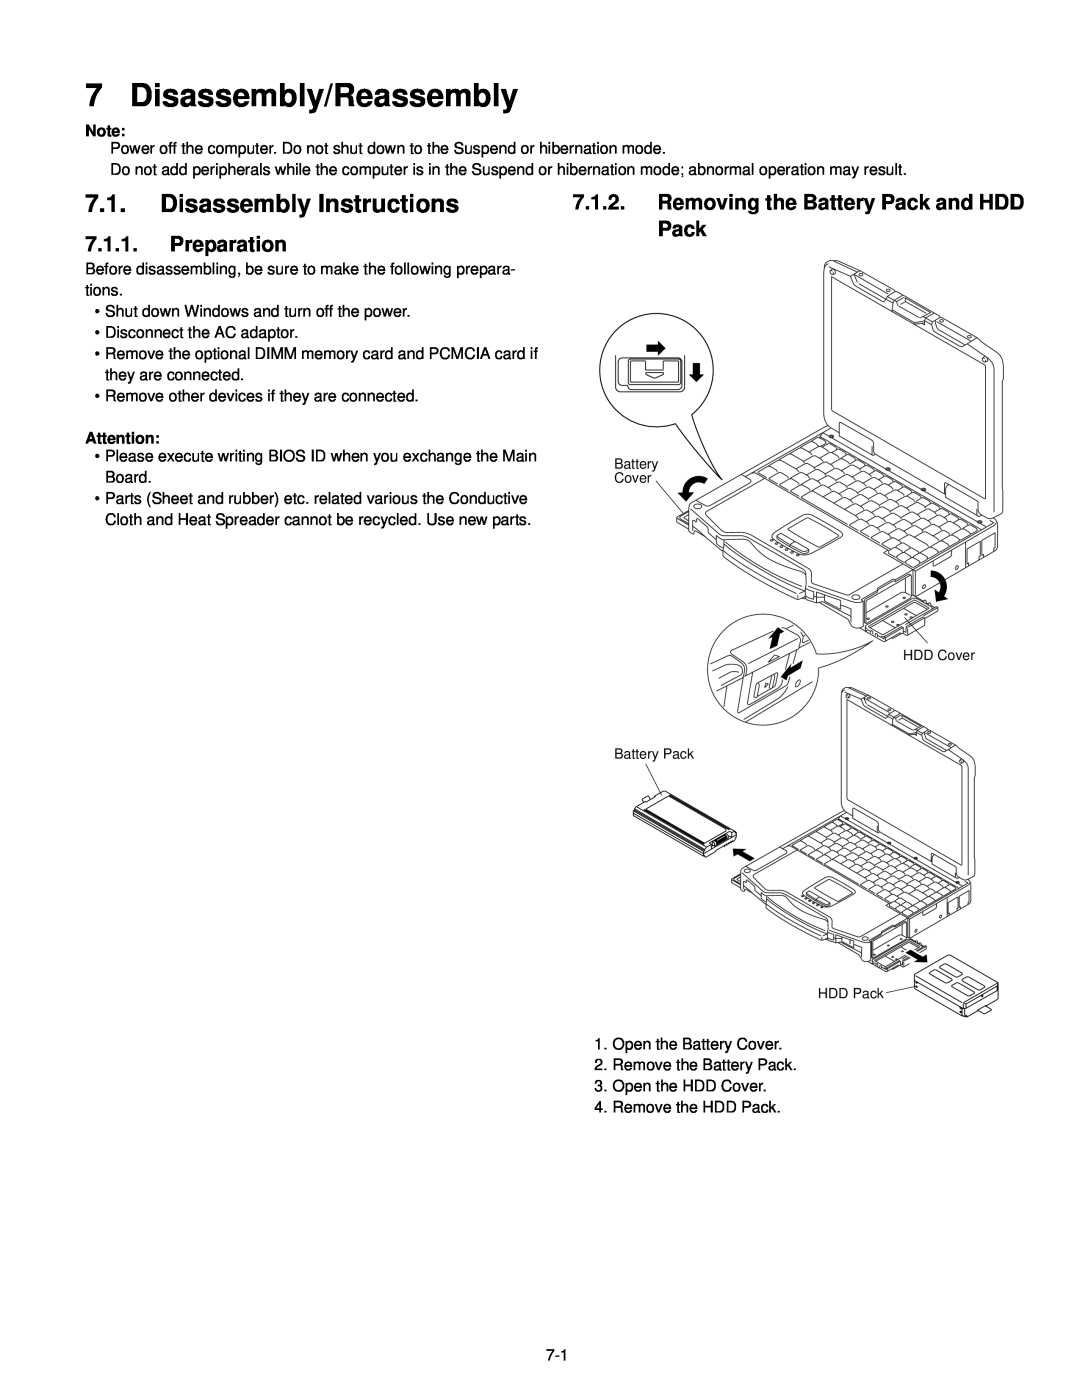 Philips CF-30FTSAZAM Disassembly/Reassembly, Disassembly Instructions, Removing the Battery Pack and HDD, 7.1.1 